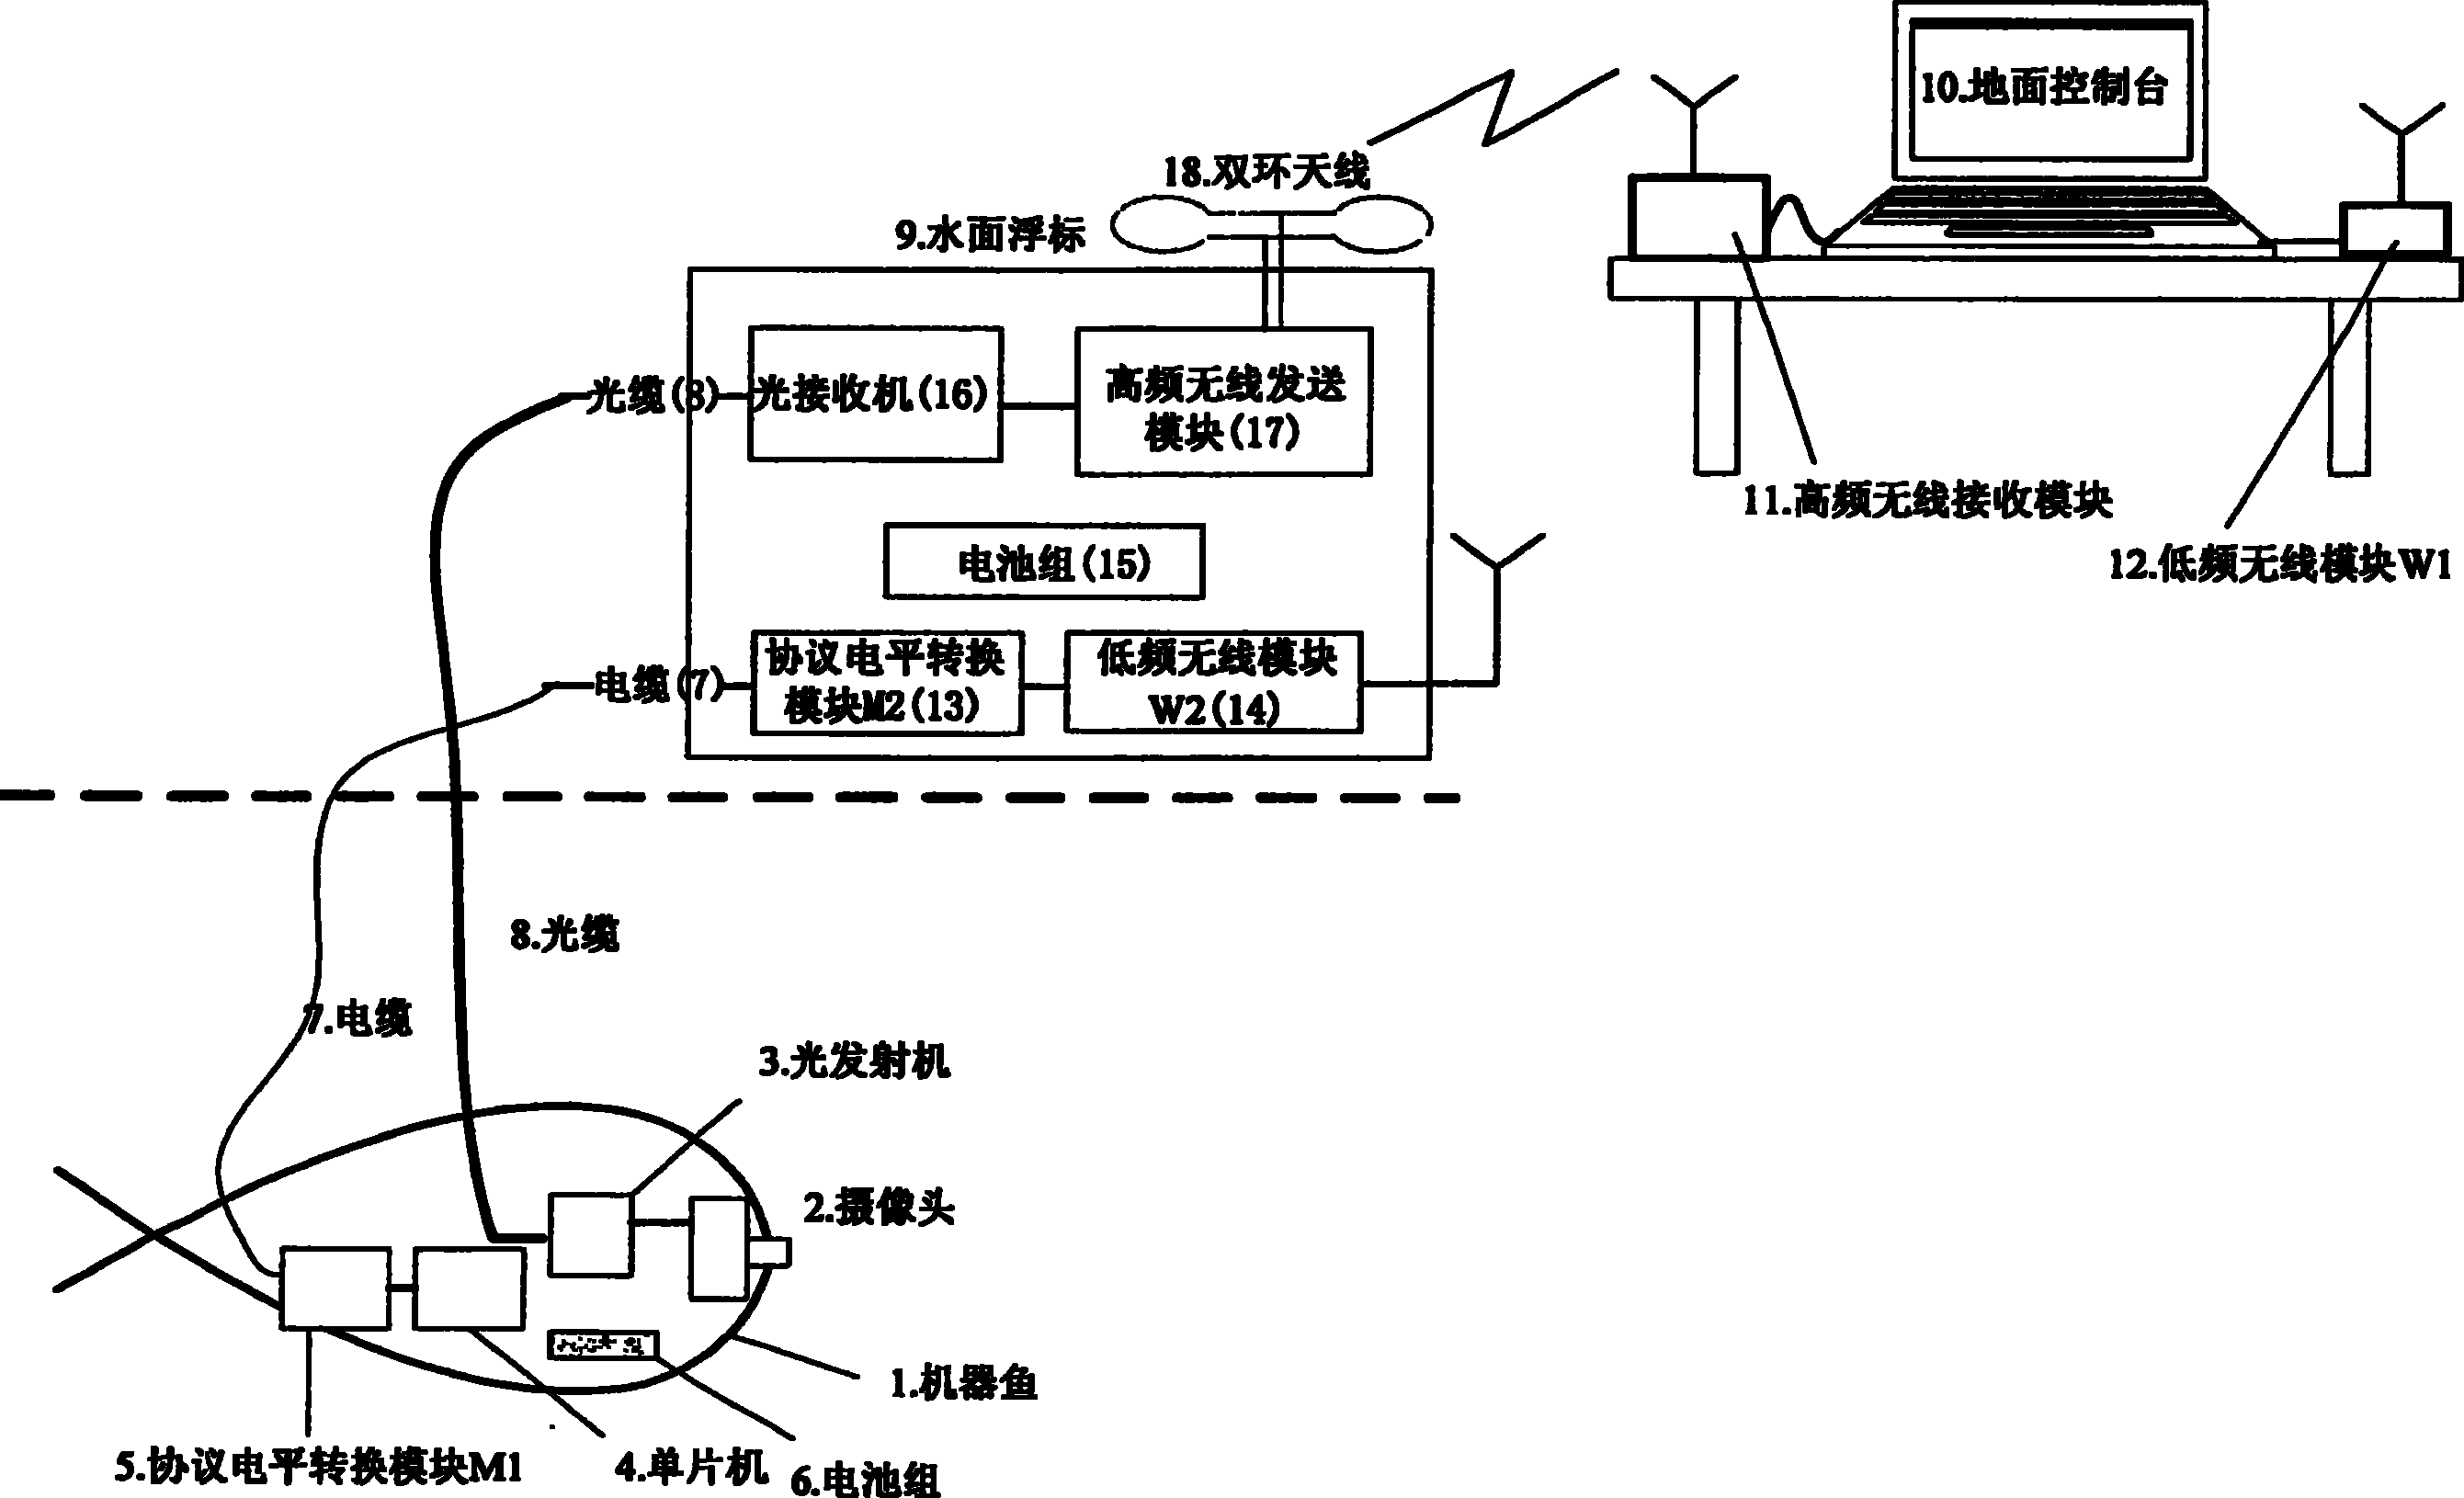 Water surface information relay system used for bionic machine fish